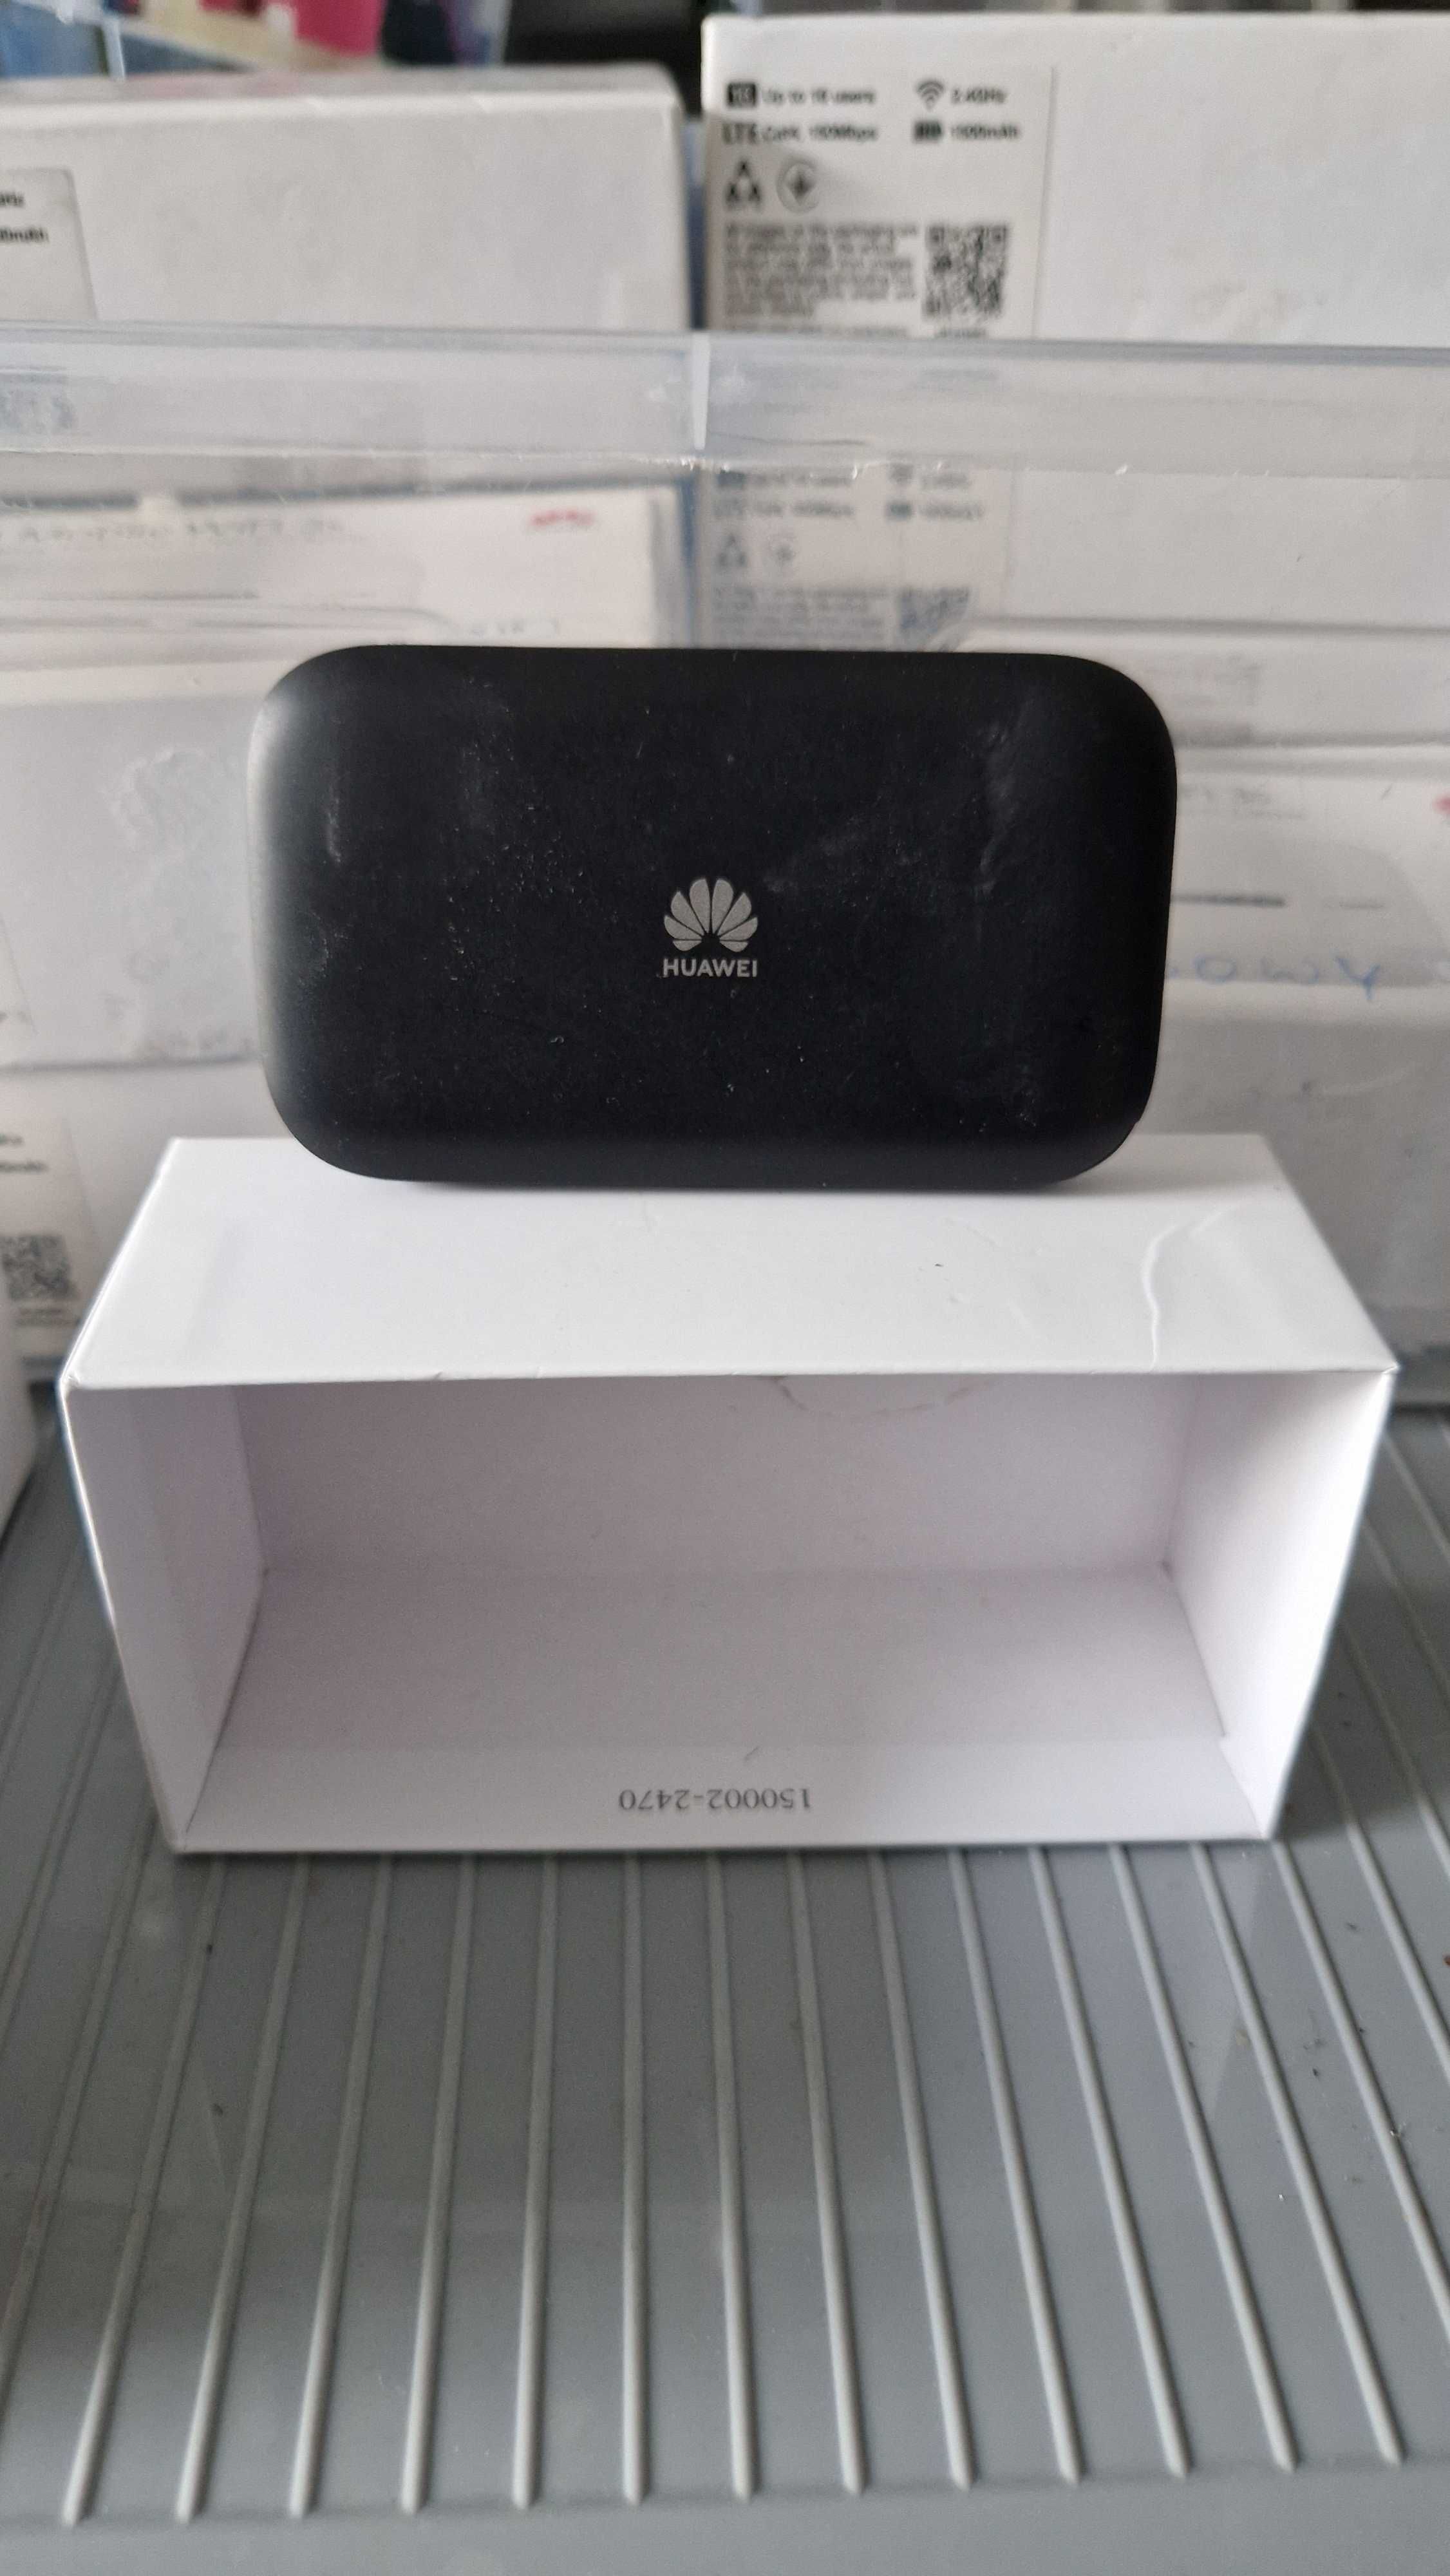 Router mobilny Huawei 4G LTE